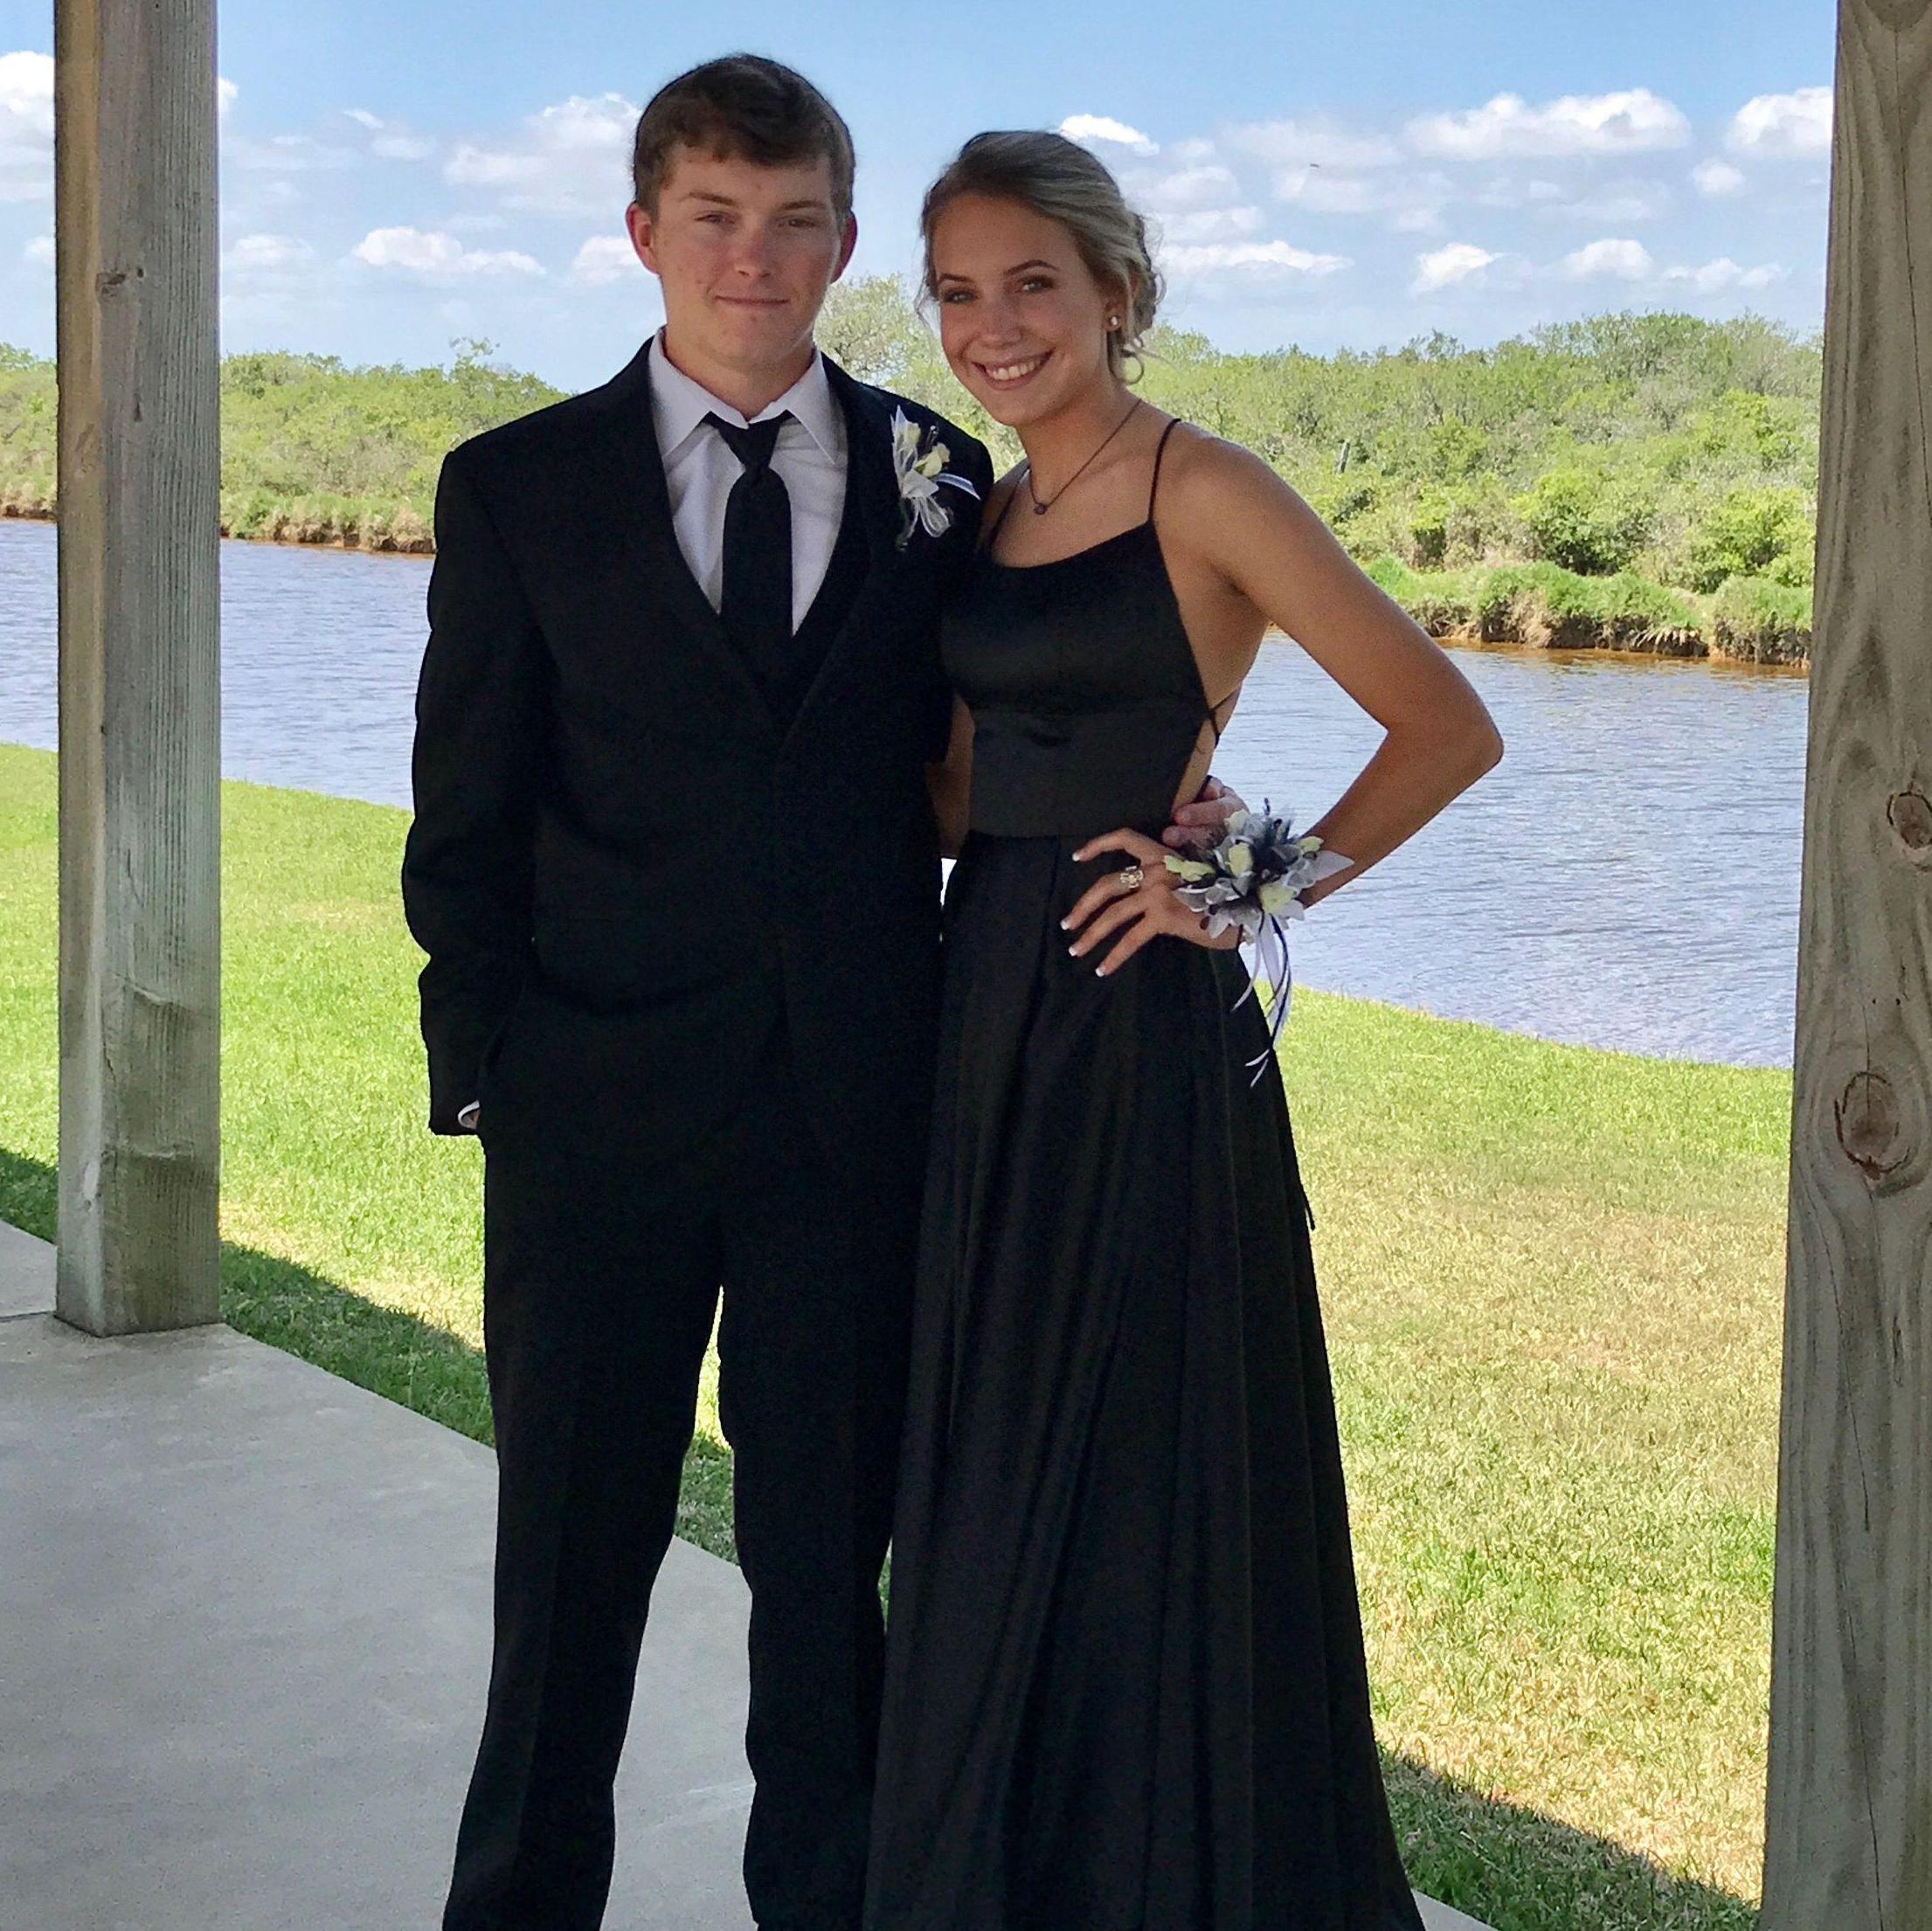 Prom! (Our mom's made us) May 5th, 2018.